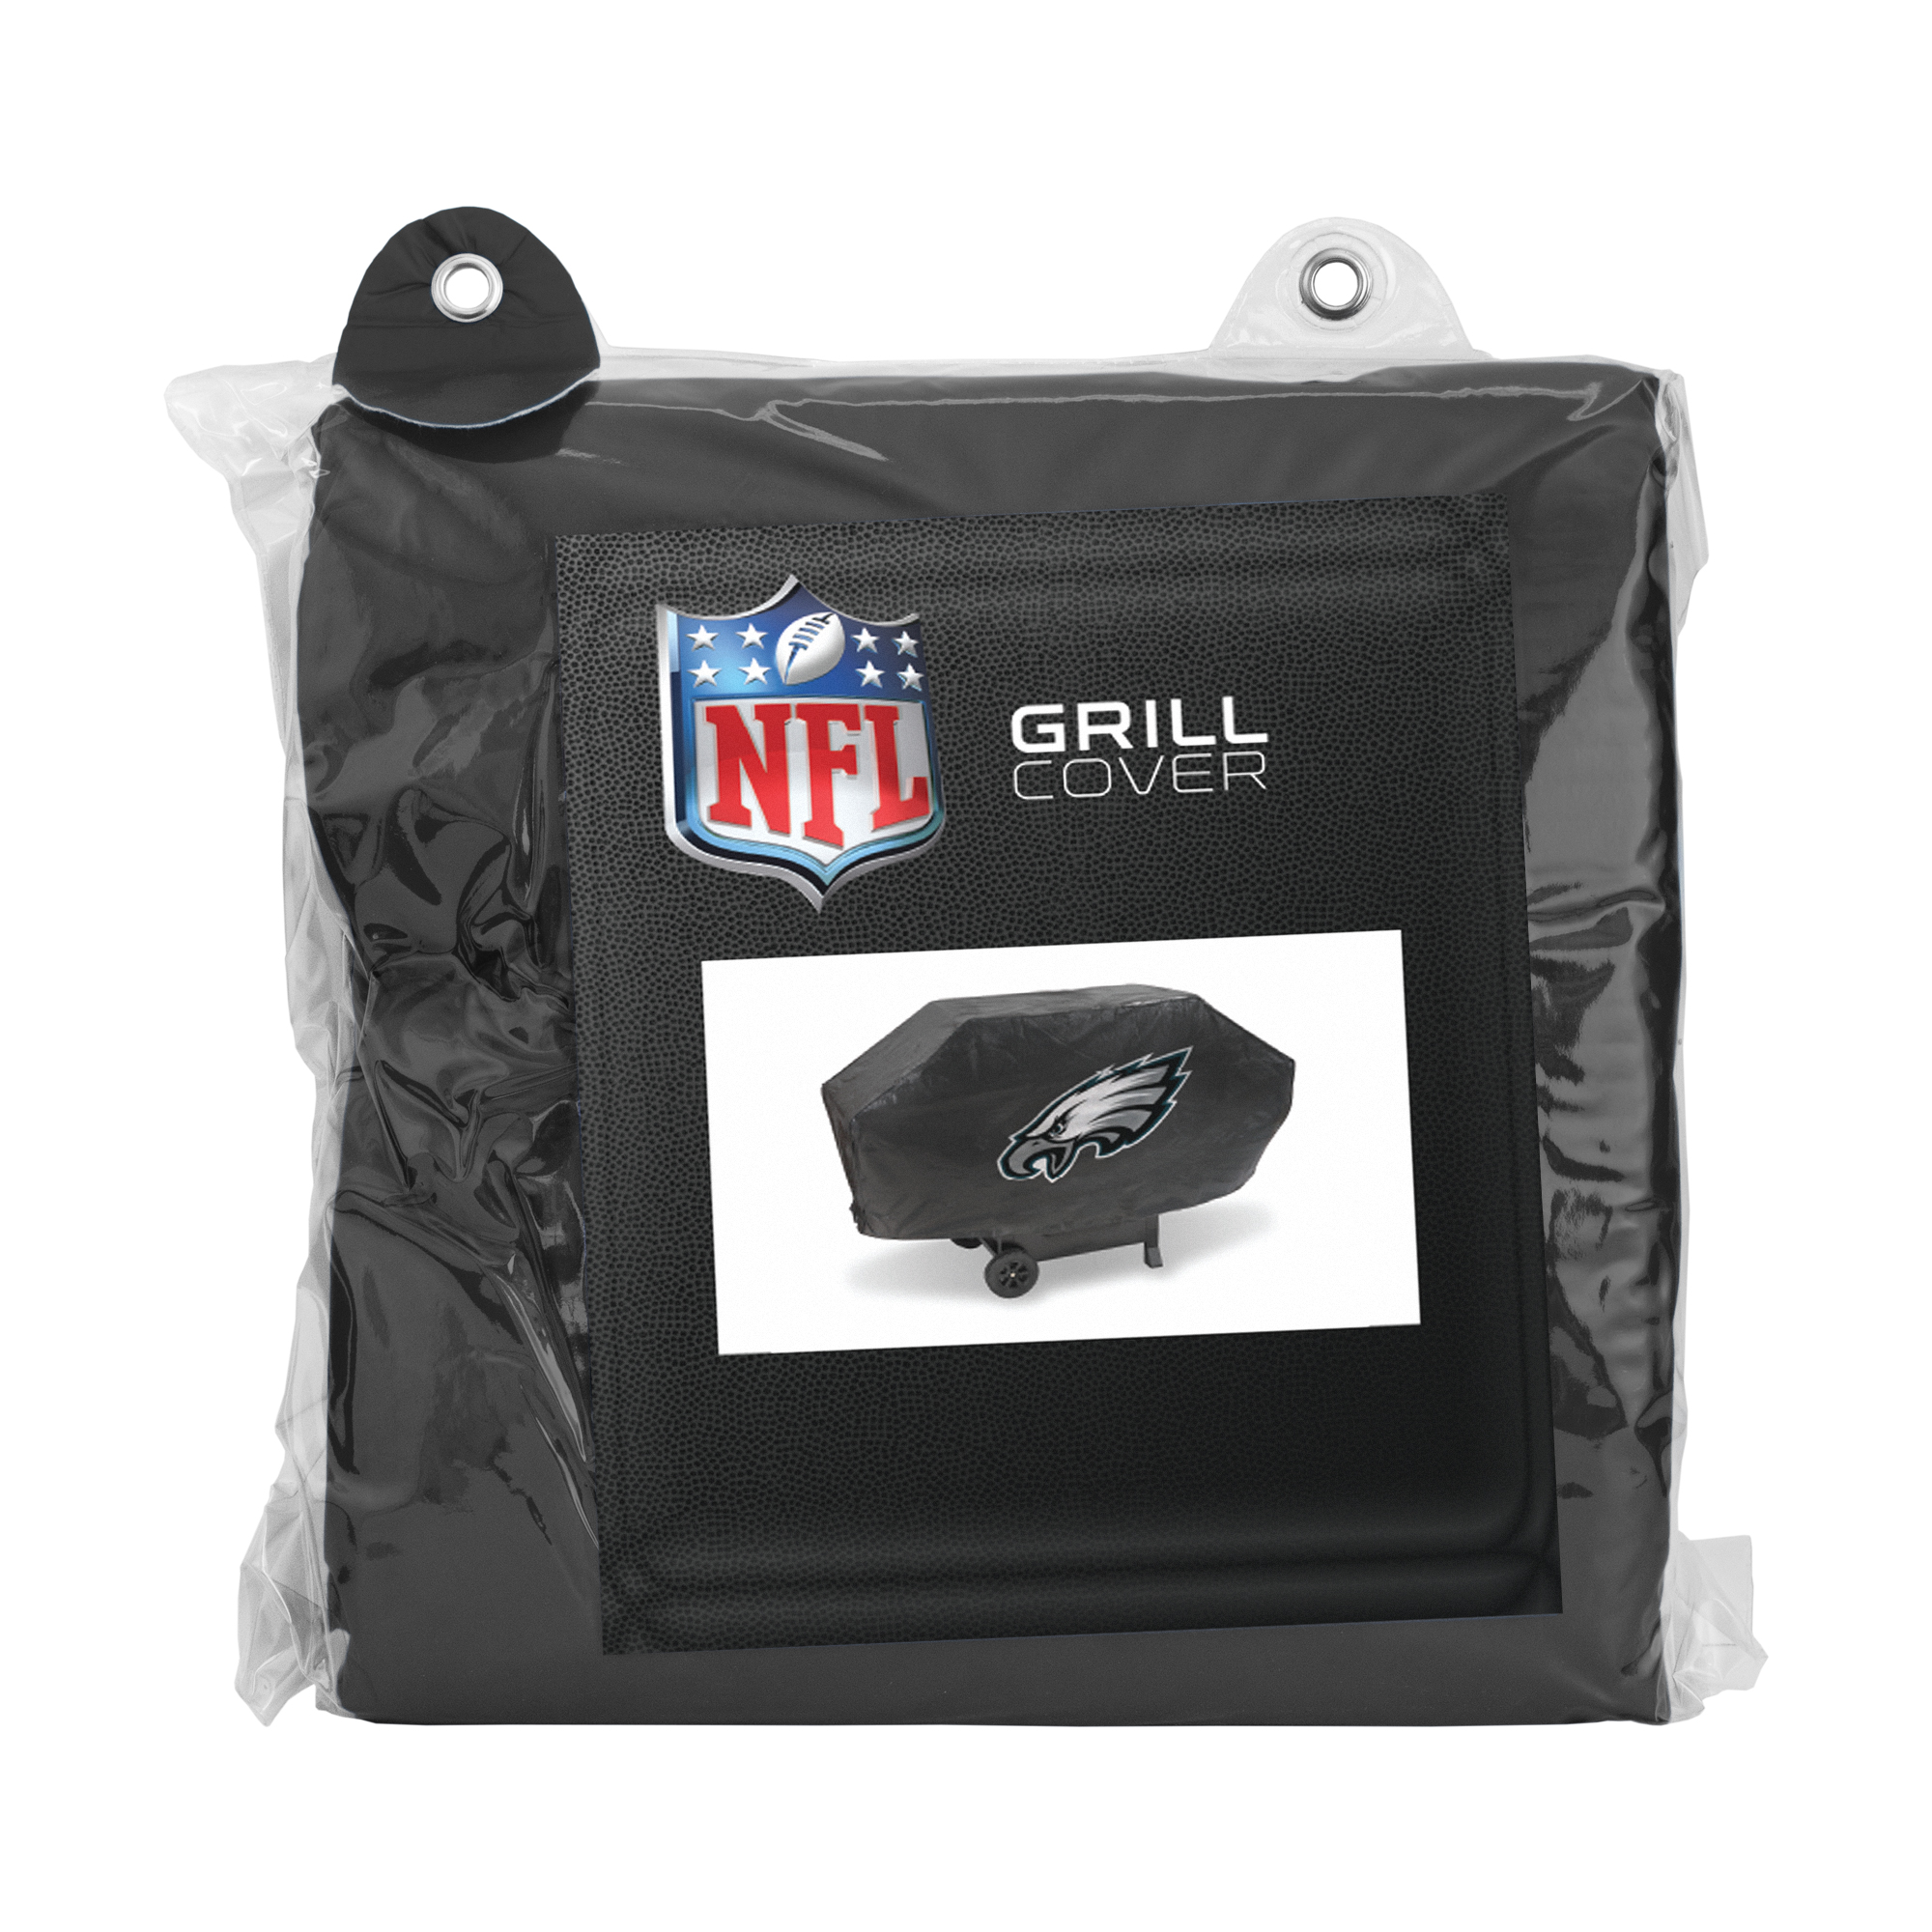 Rico Industries NFL Deluxe Grill Cover - image 7 of 8